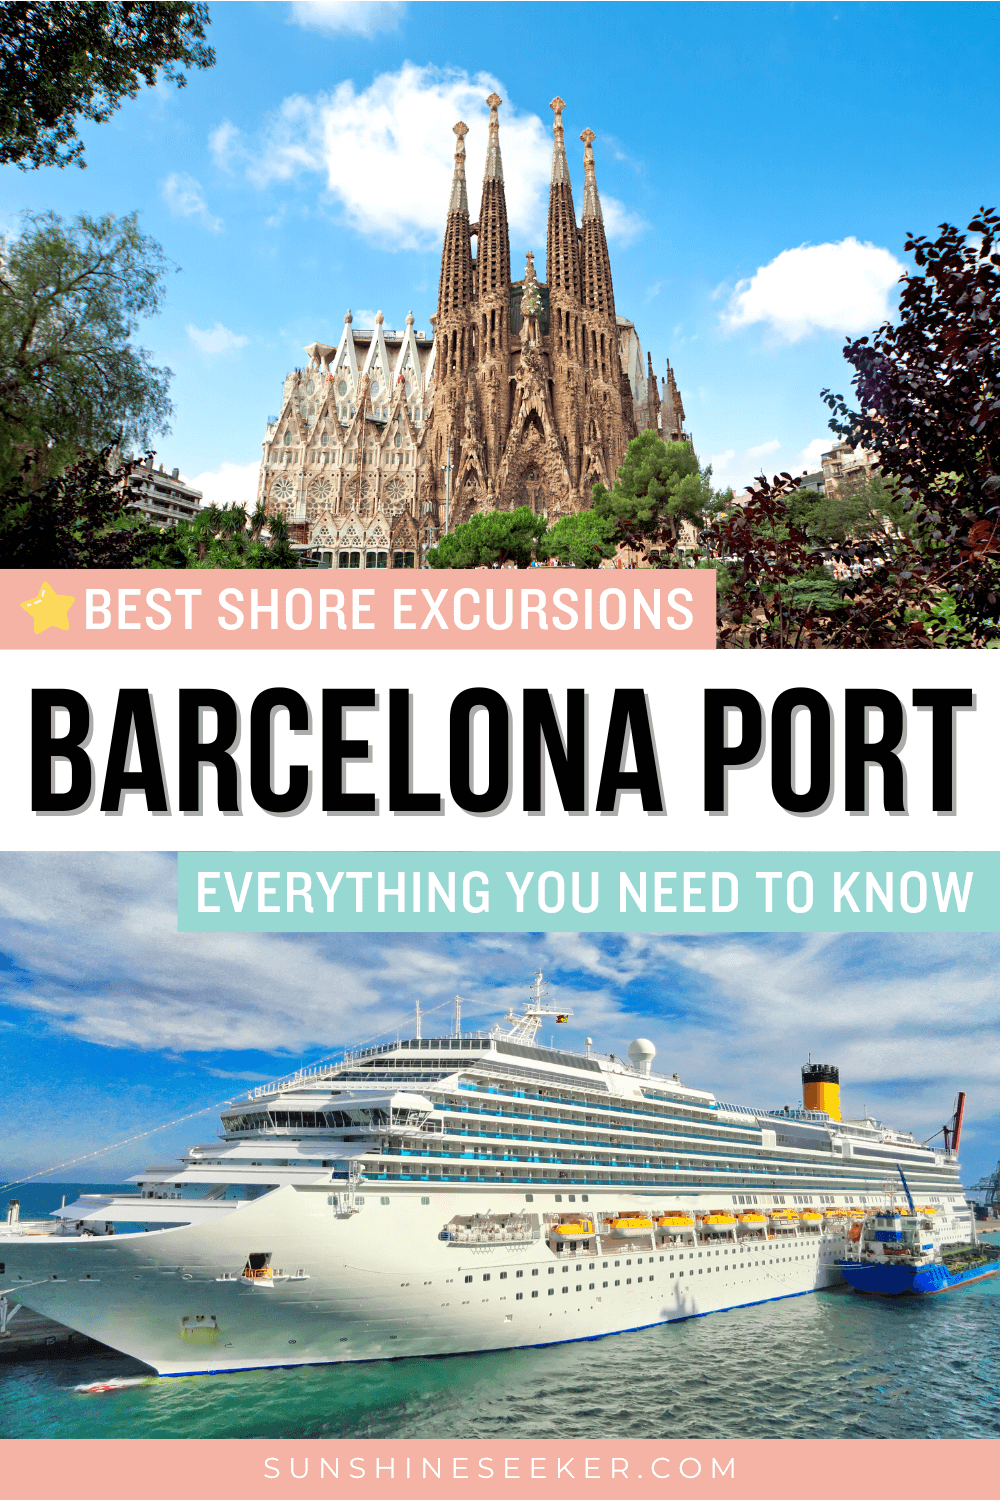 Your complete guide to Barcelona cruise port. The best shore excursions and how to get around Barcelona from the cruise port. Everything you need to know before you dock at Barcelona cruise port in Spain.